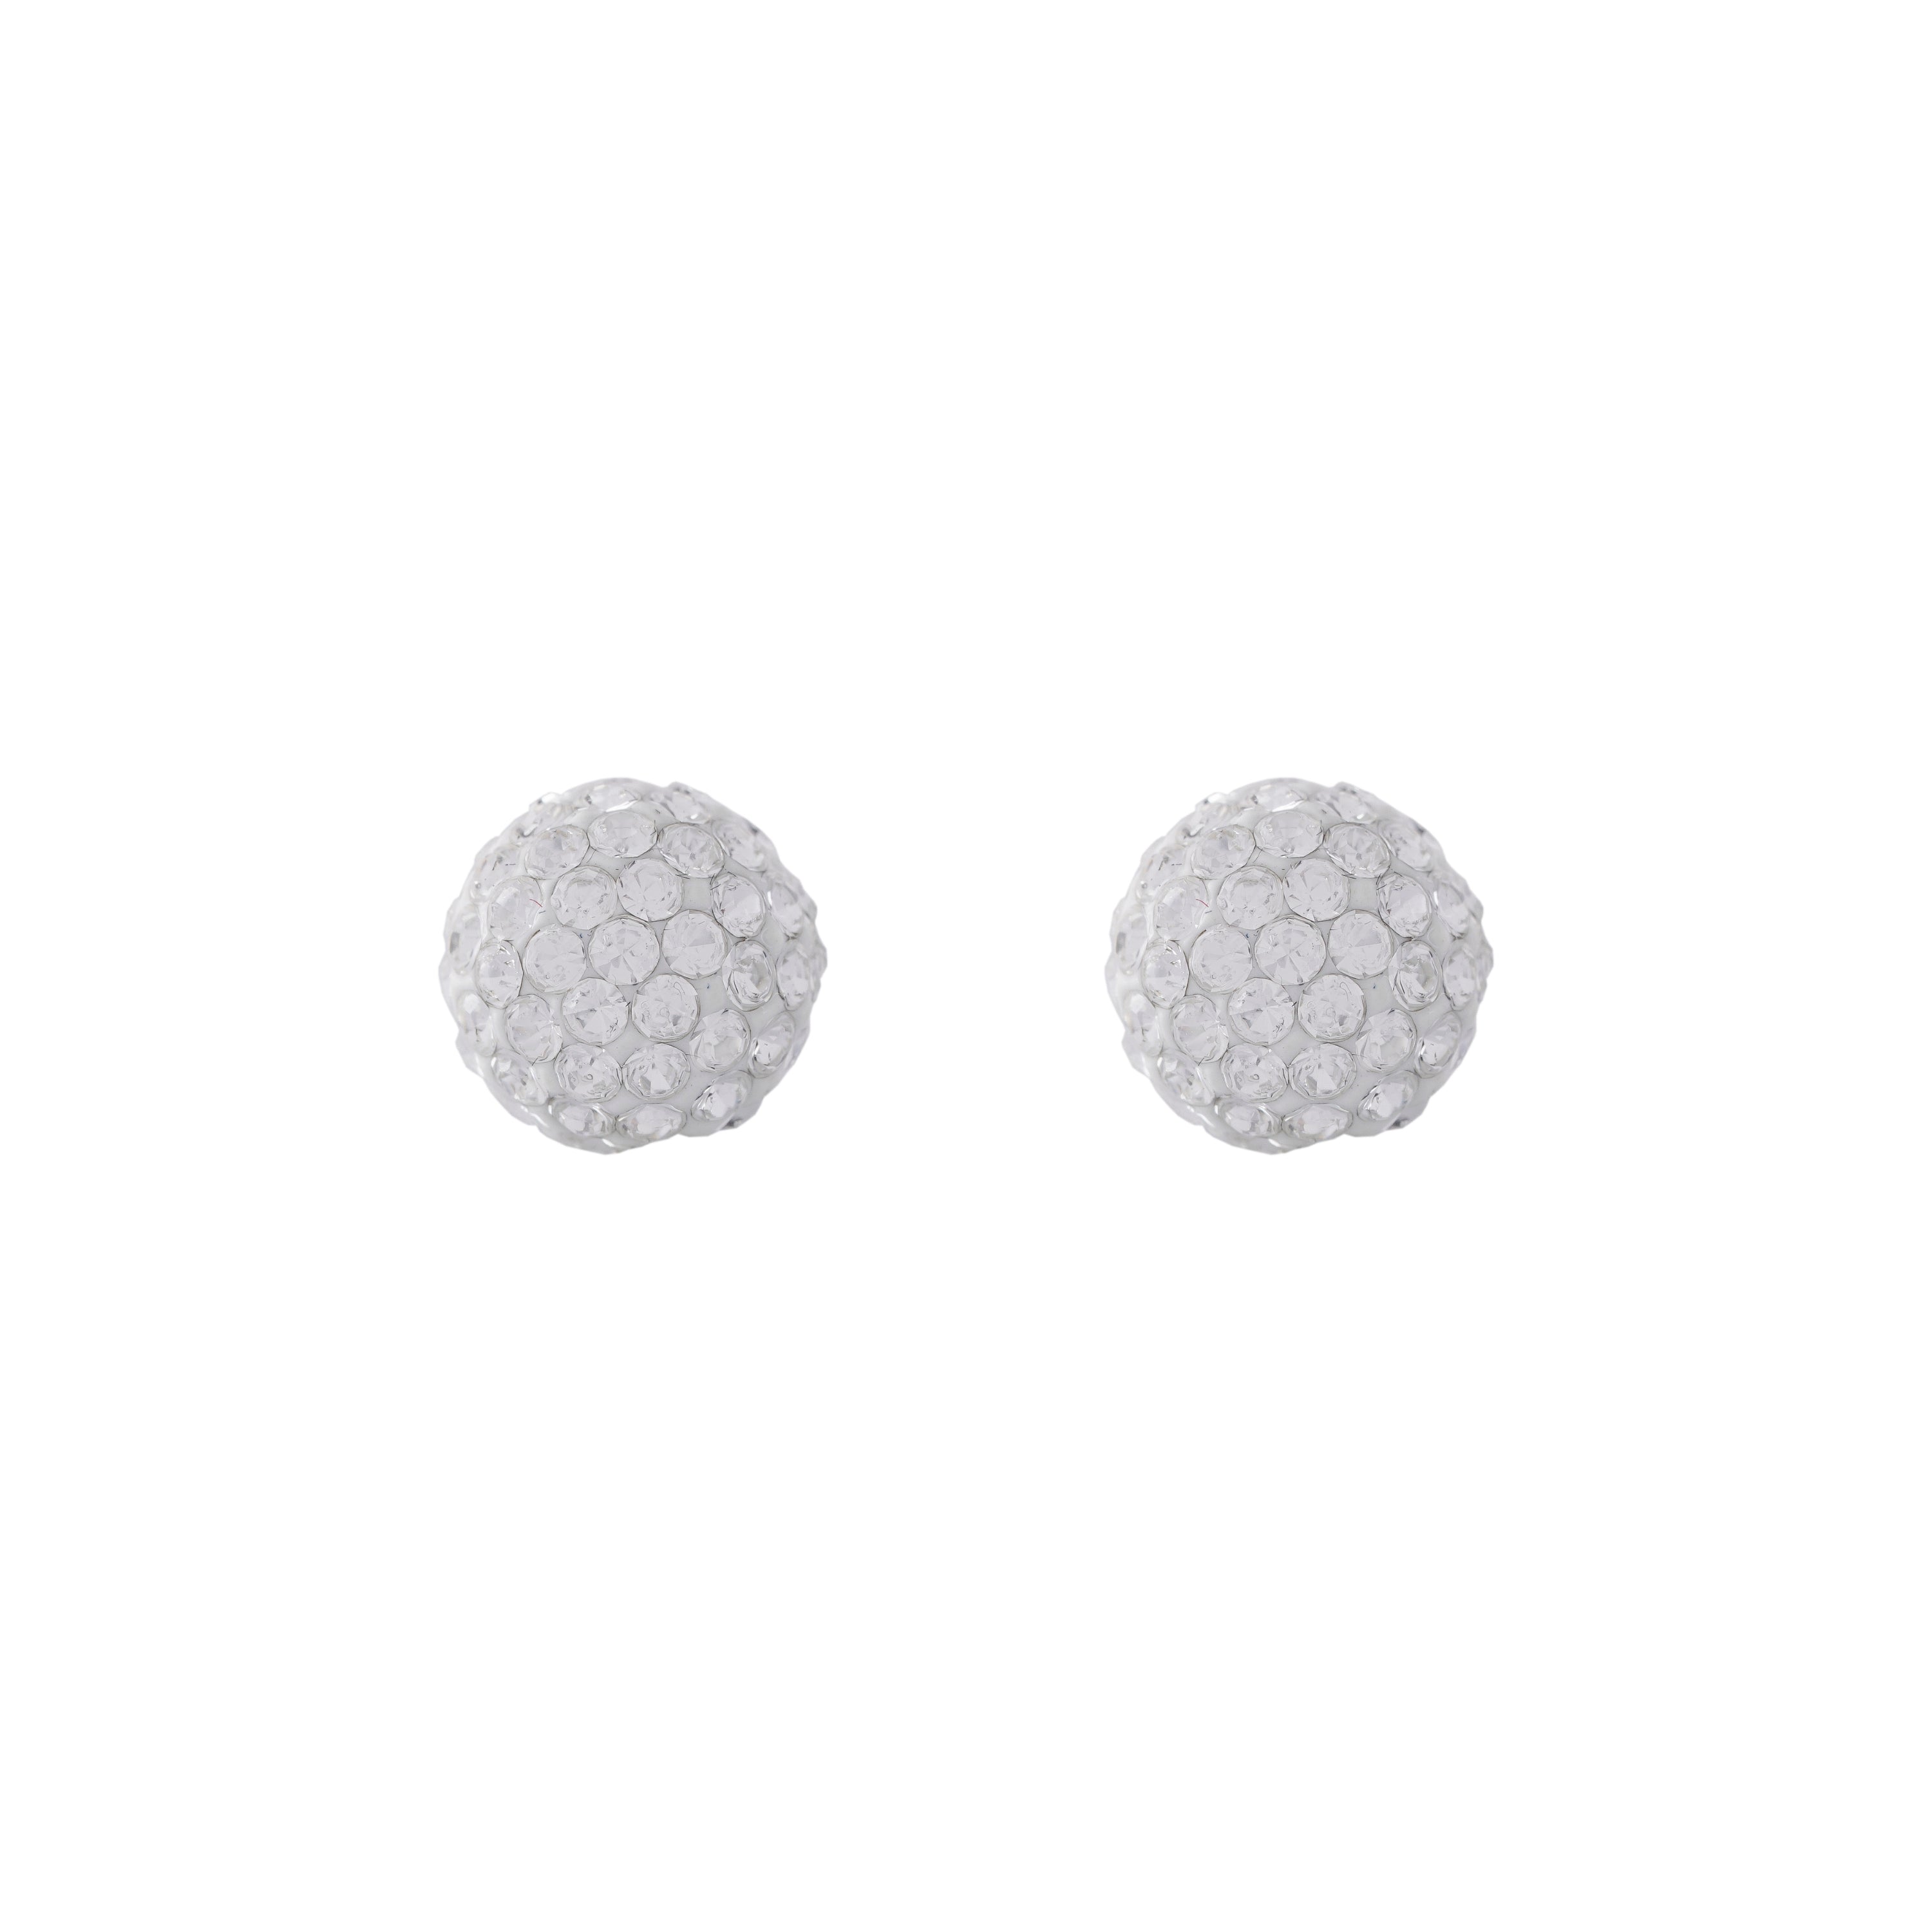 8MM Fireball Ð Crystal Allergy free Stainless Steel Ear Studs | MADE IN USA | Ideal for everyday wear